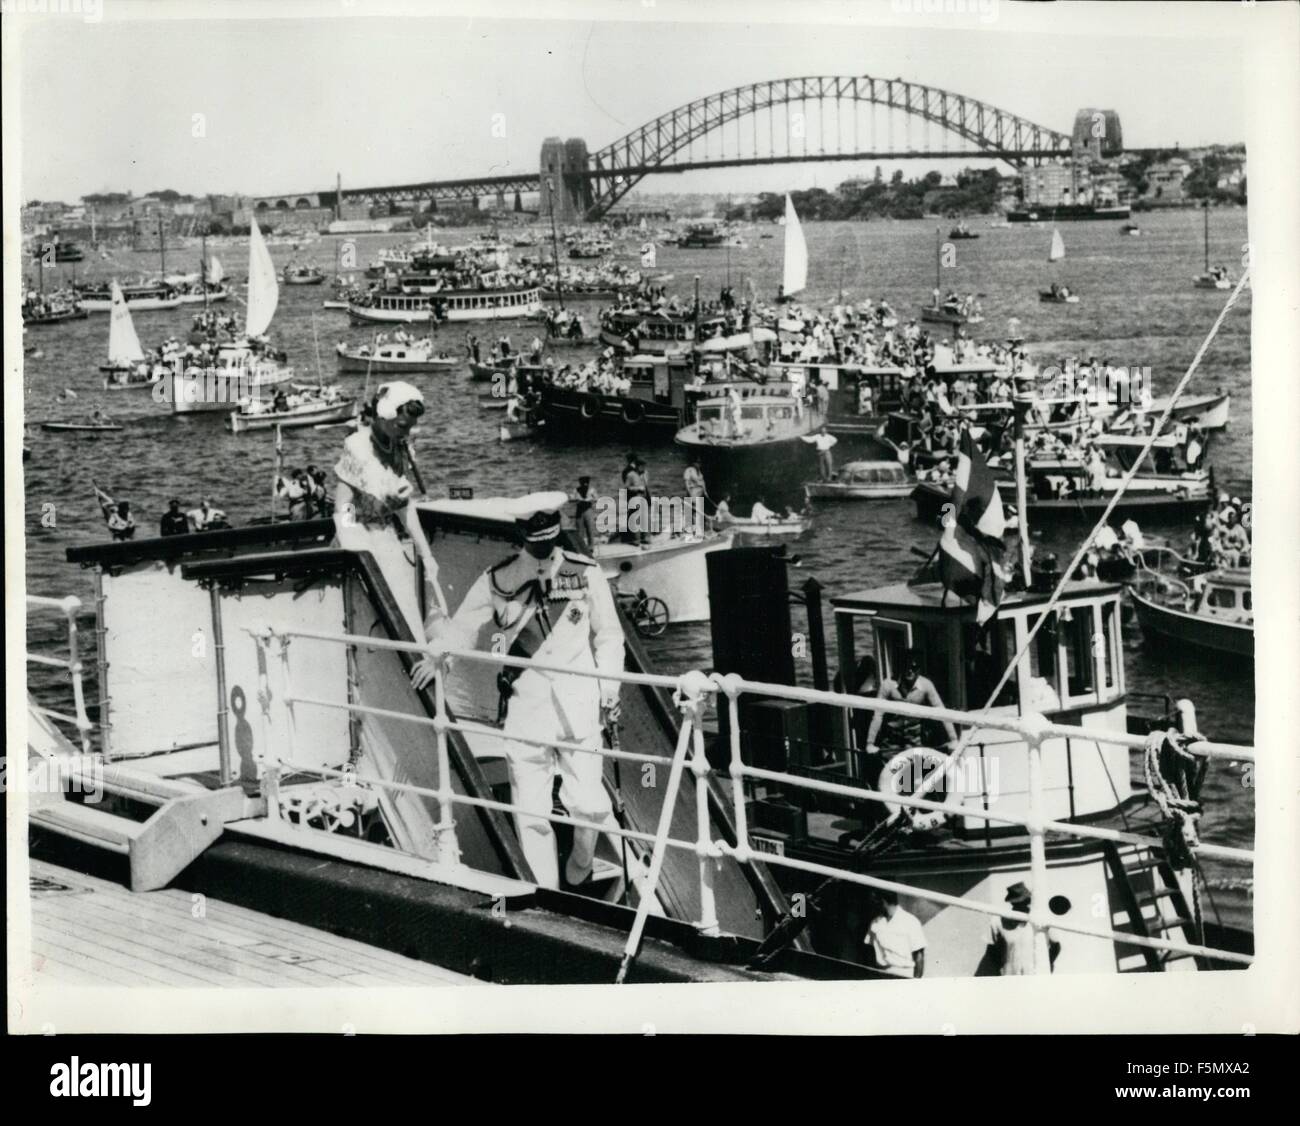 1972 - Queen And The Duke Of Edinburgh Arrive In Australia Boats In The Harbour: A million Australians gathered in Sydney, Australia- today to greet H.M. The Queen and the Duke Of Edinburgh when they arrived aboard the liner Gothic from New Zealand. They were met on the quayside by Field Marsgal Sir William Slim the Governor General of Australia. Photo shows The Queen precedes the Duke Of Edinburgh who were uniform of Admiral of the Fleet - as they step down the gangway of the liner Gothic on arrival in Sydney Harbour. Section of the famous Sydney Harbour Bridge can be seen in the background s Stock Photo